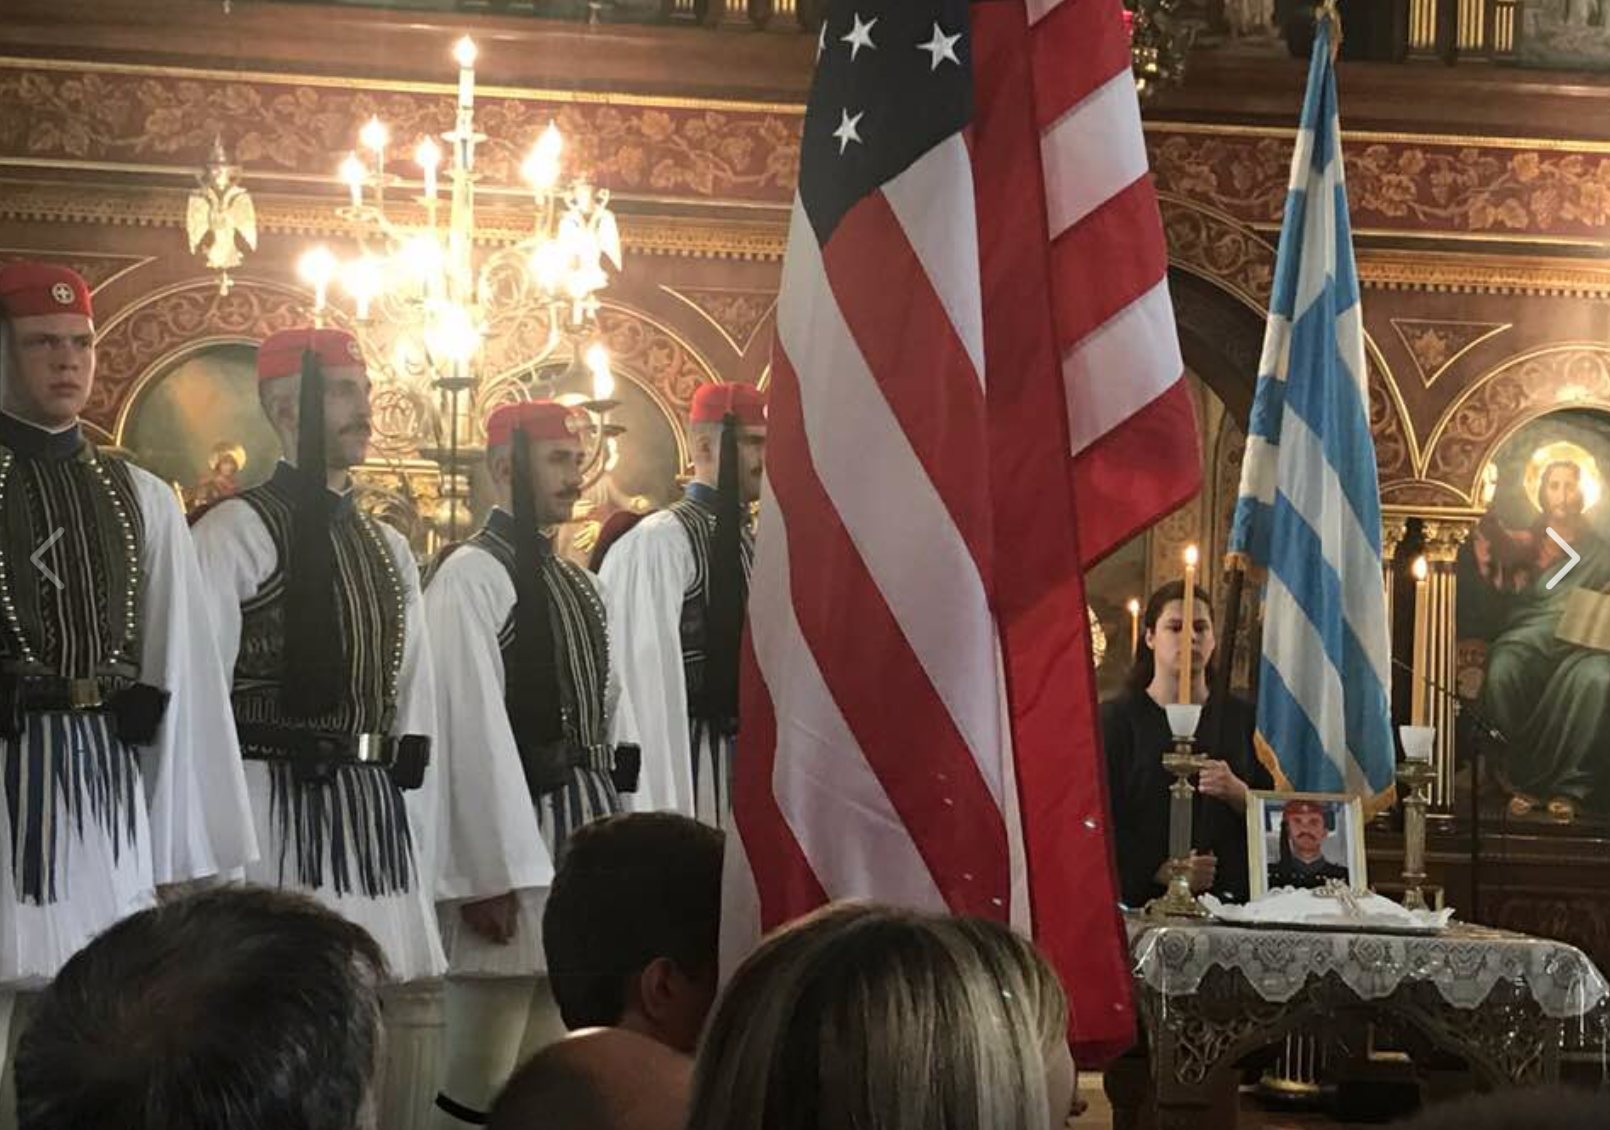  The Evzone Greek Presidential Guard during a memorial service at the St. George Cathedral of Philadelphia 